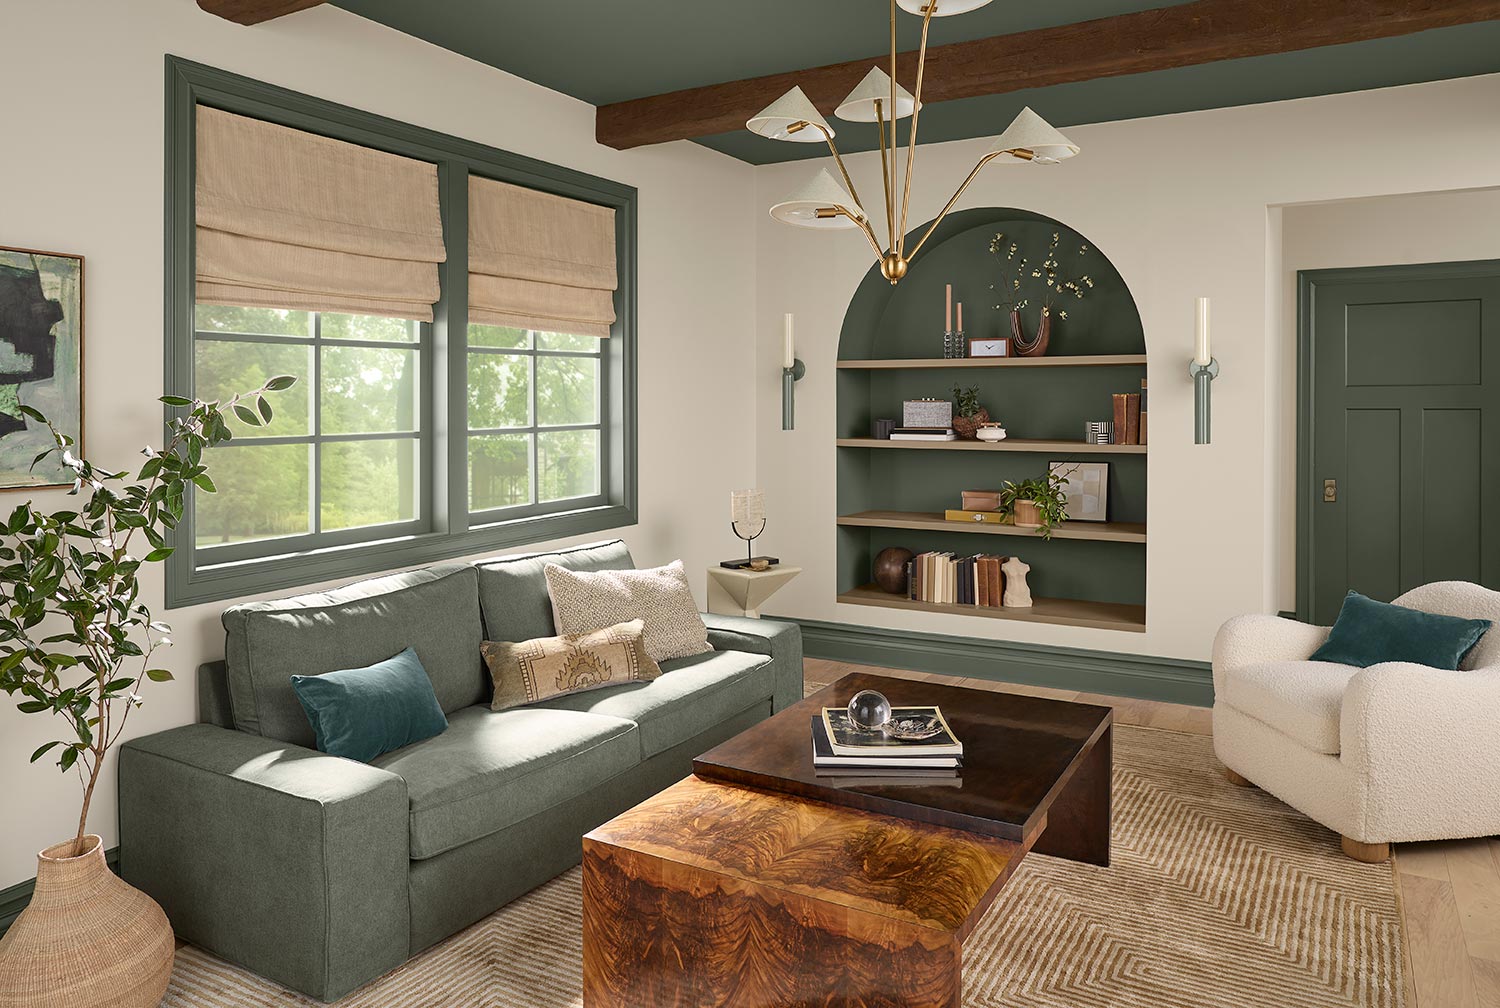 An organic modern living room with ceiling, trim, and accents painted in Rosemary SW 6817.